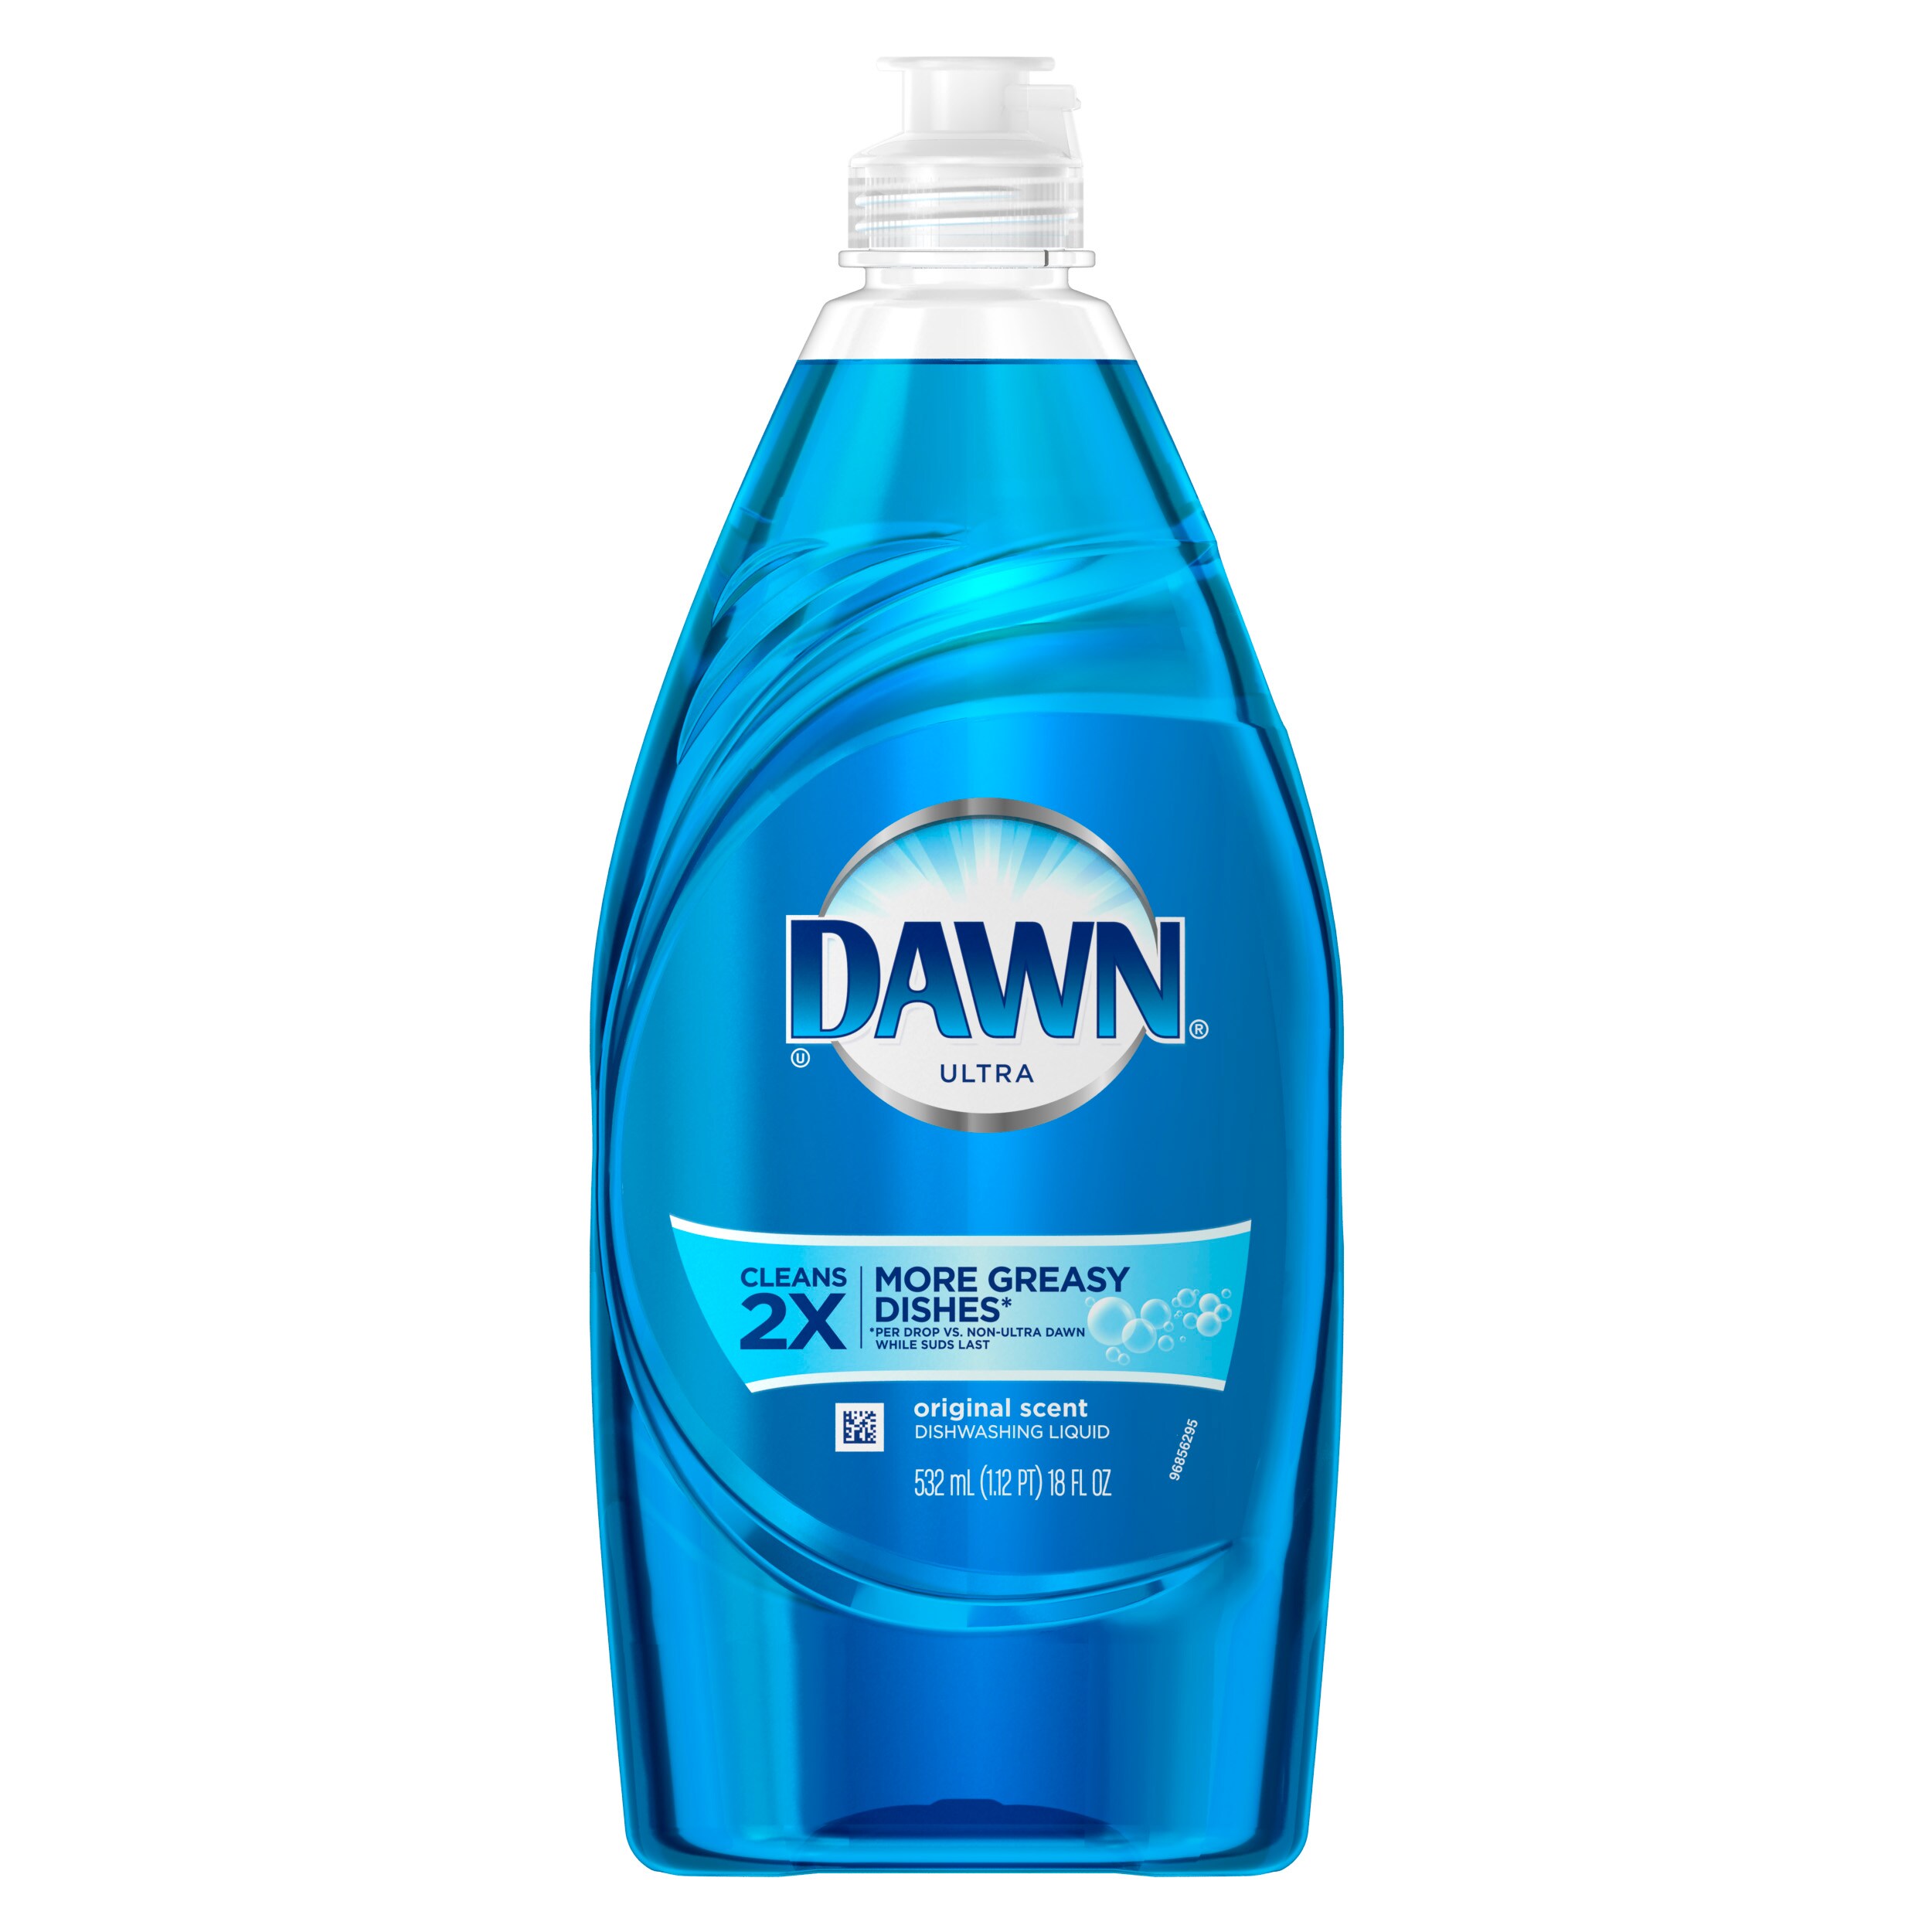 Can You Use Dawn Dish Soap on Baby Bottles 